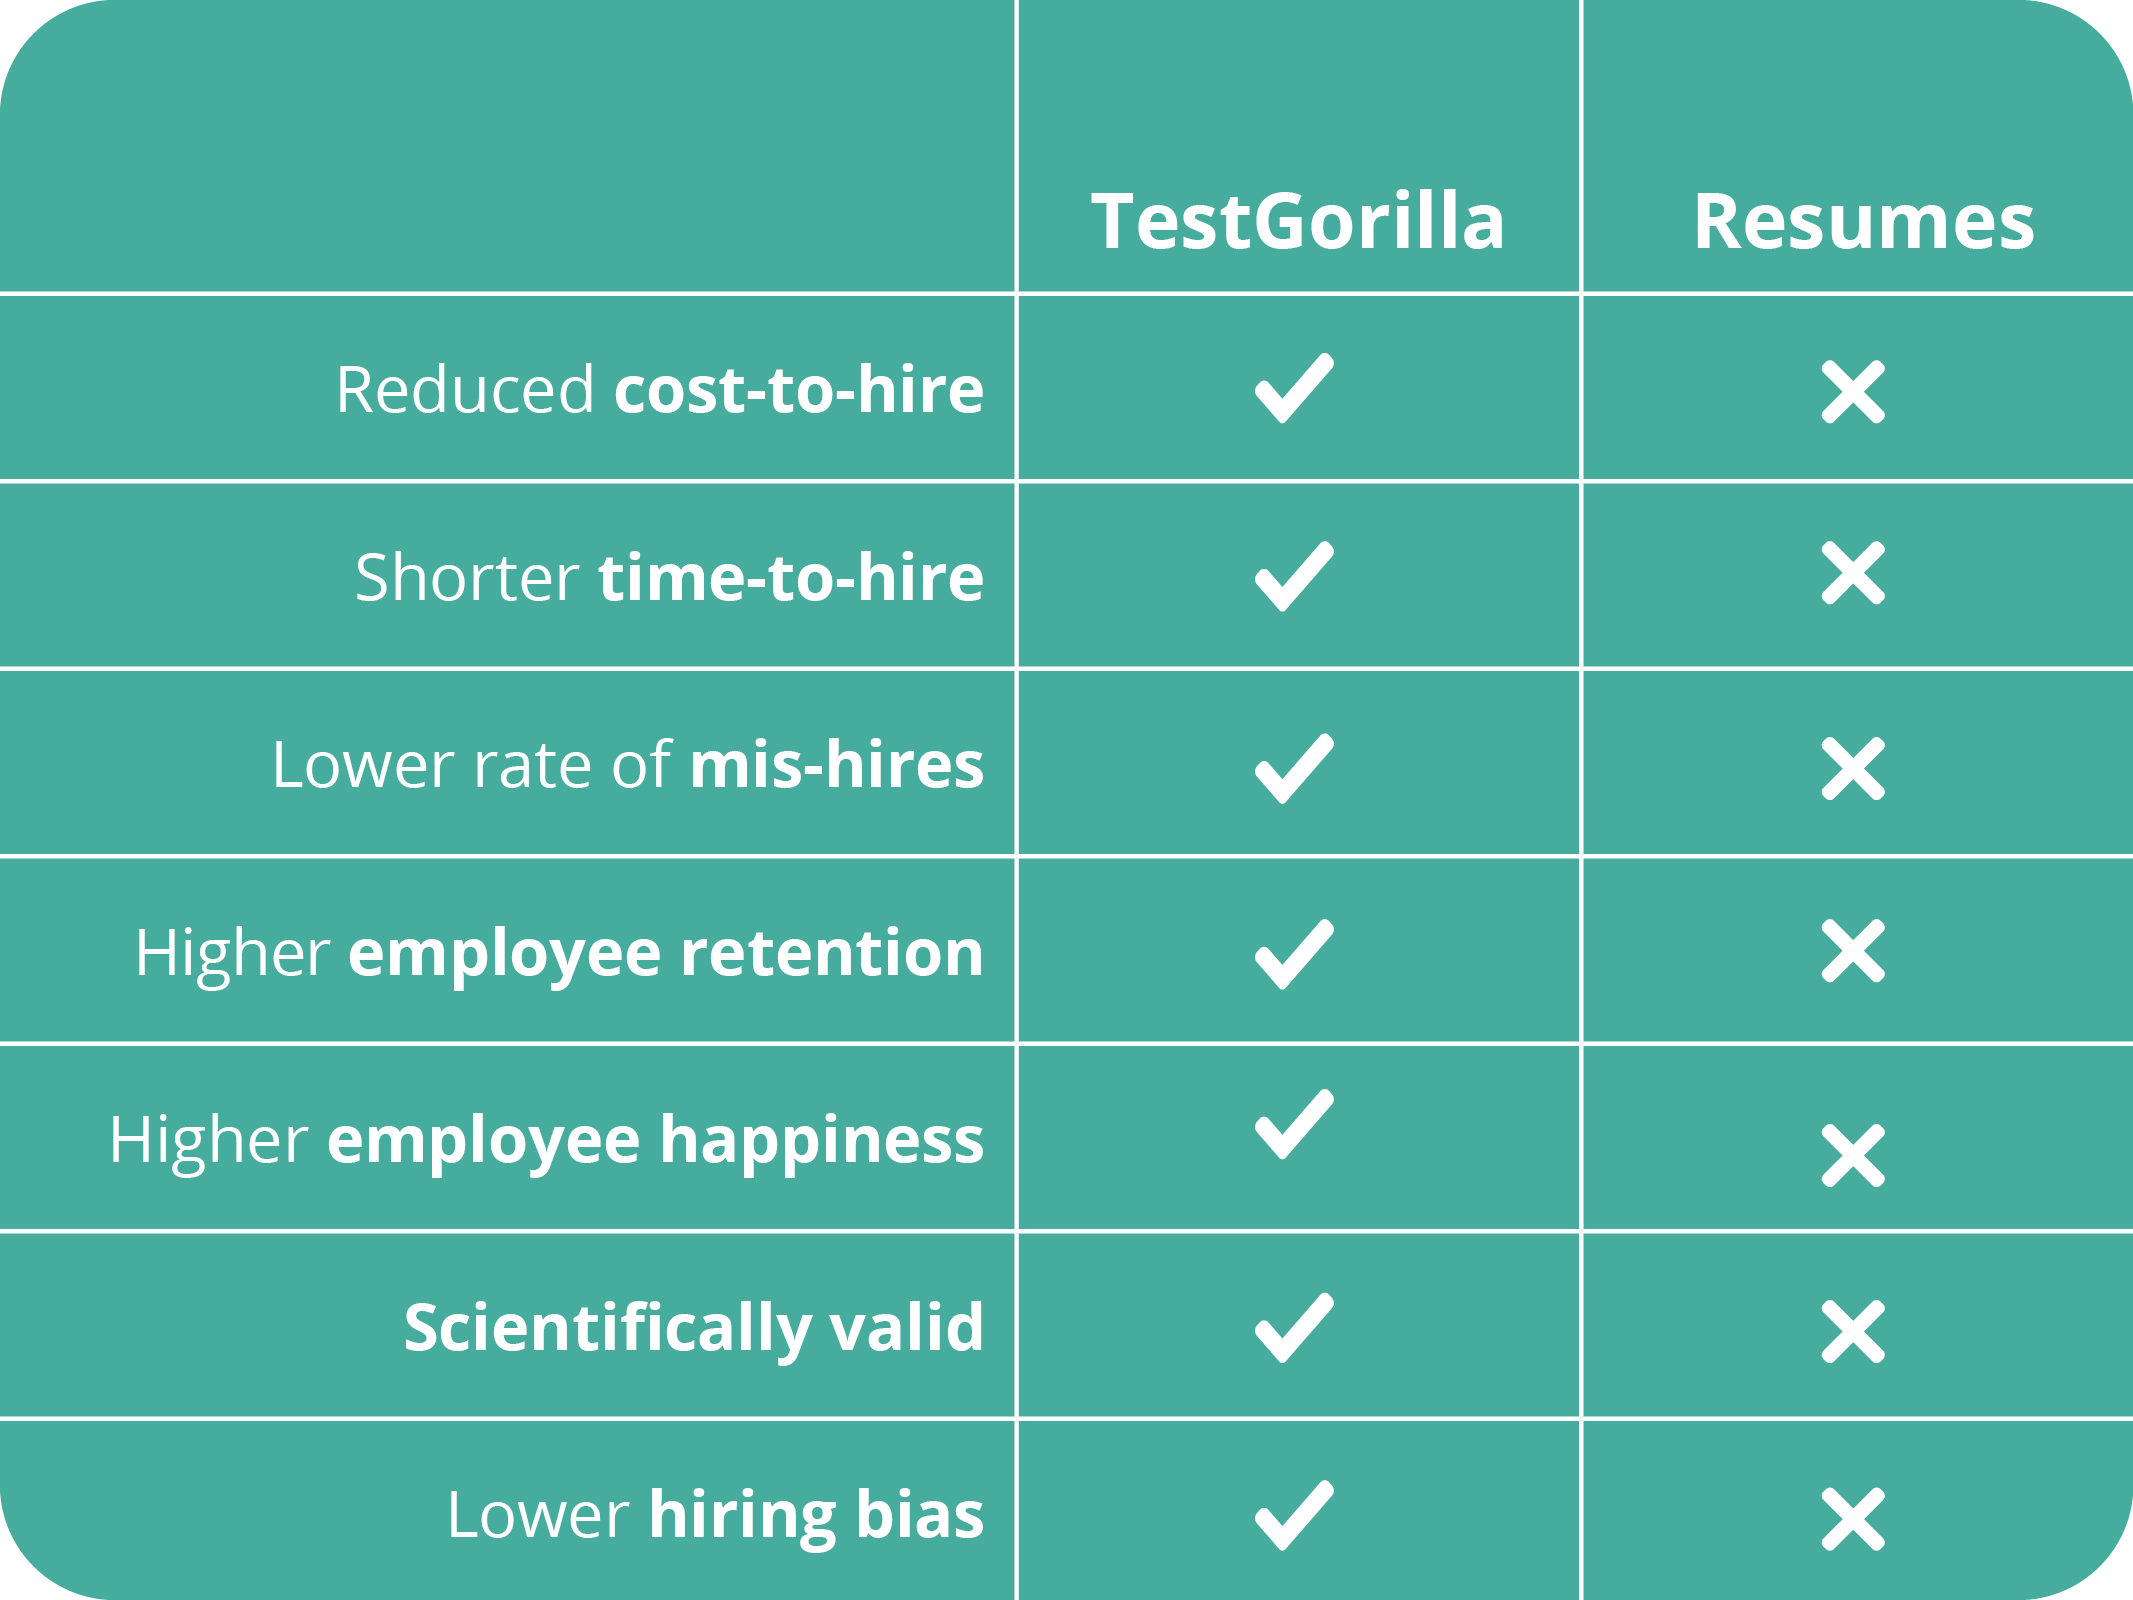 Table showing a comparison between TestGorilla and resumes